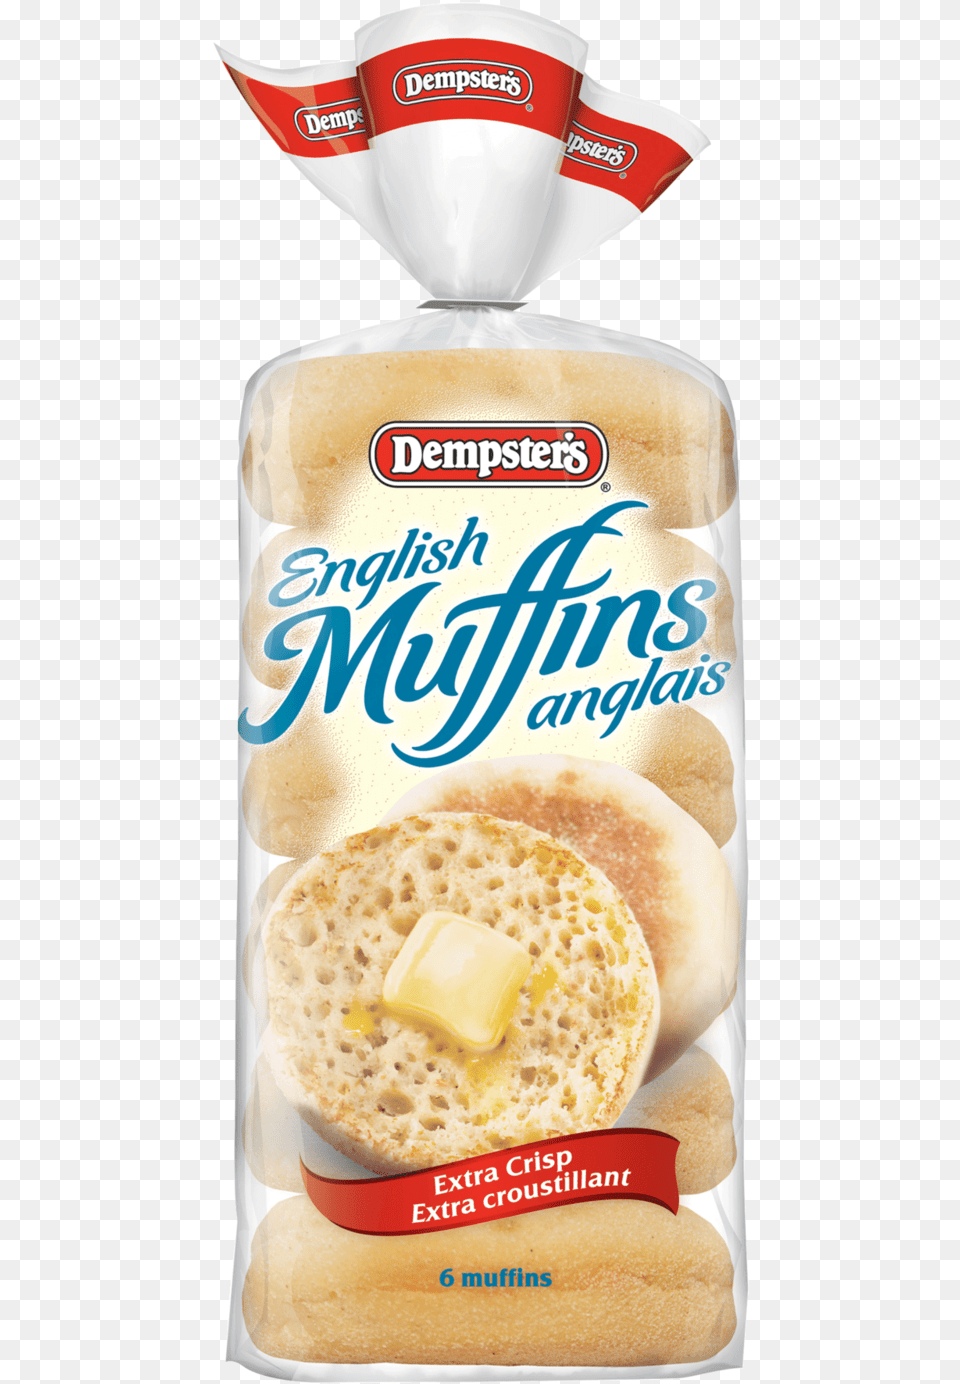 English Muffins Xtra Crispy Dempster39s Whole Wheat English Muffins, Bread, Food Png